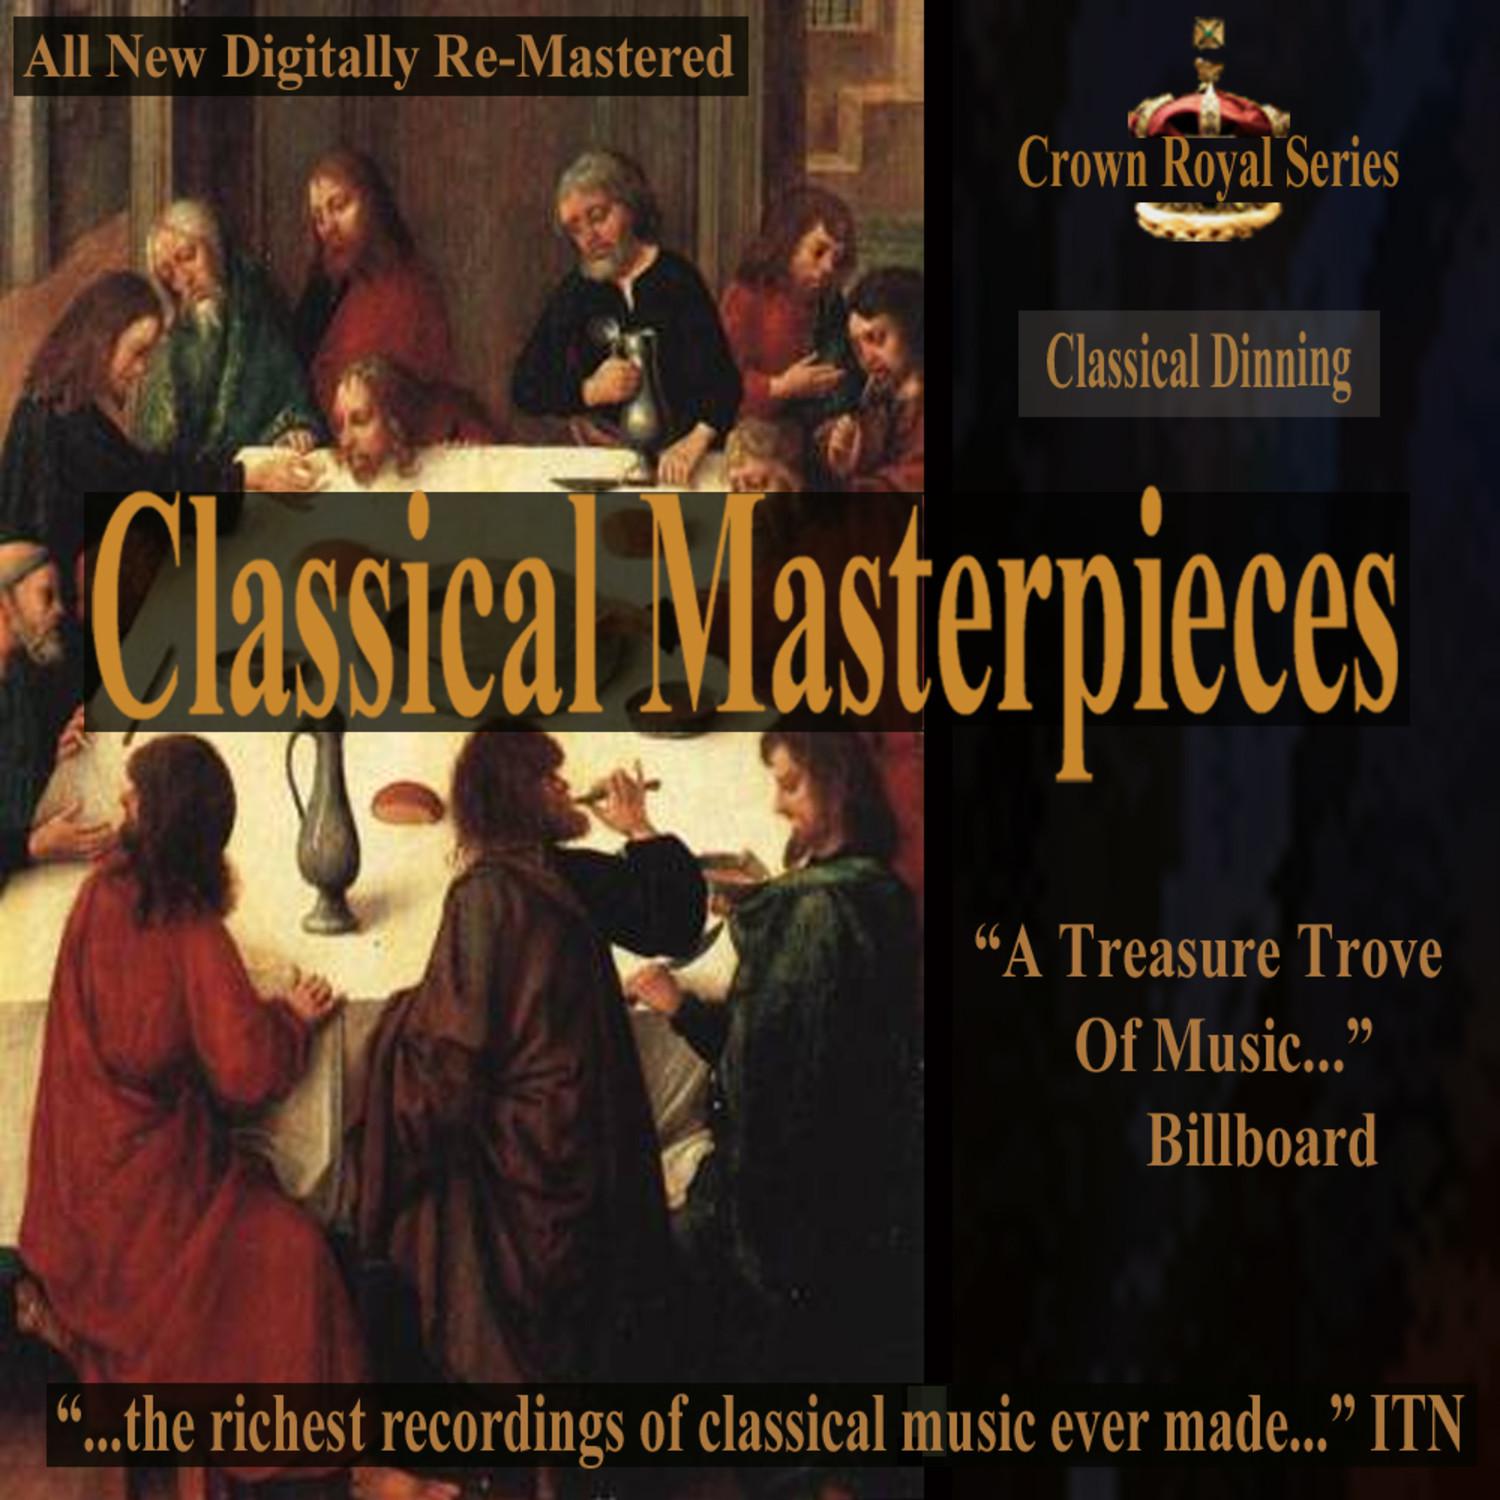 Concerto for Violin and Orchestra in D Major Op. 35, Allegro moderato, Part 4